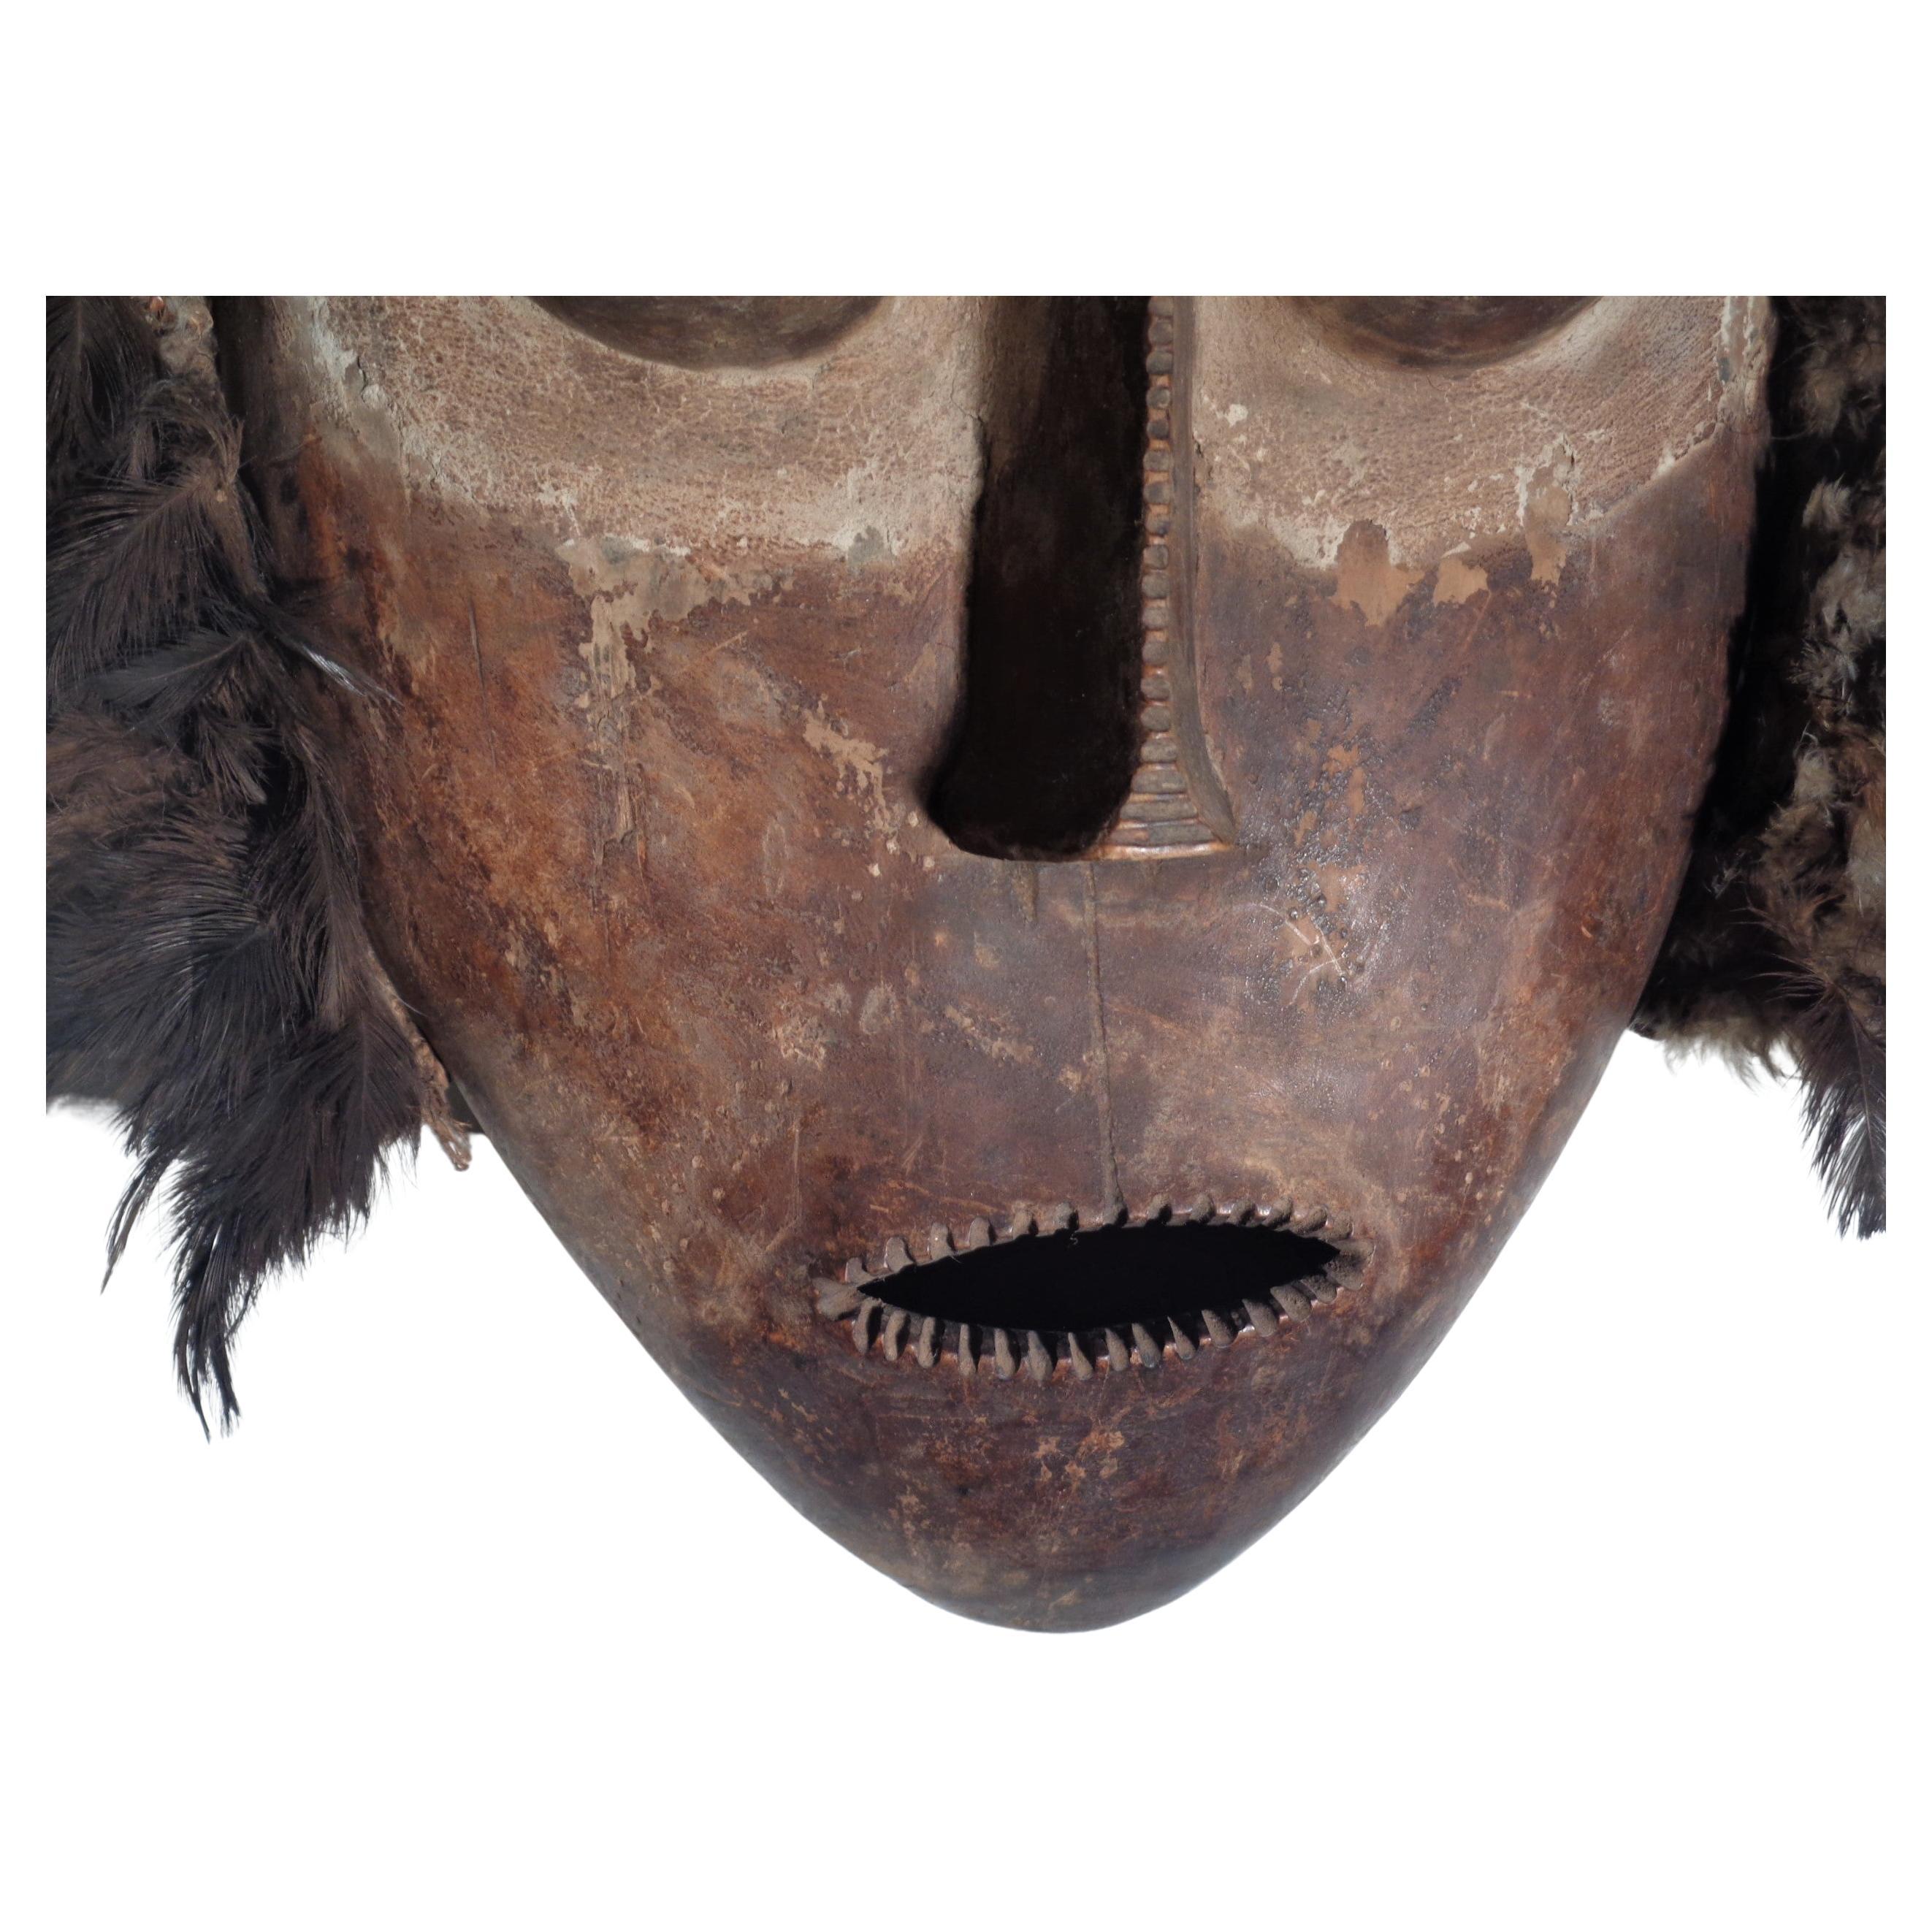 African Bembe mask with feathers from Congo region in original aged pigmented color to wood. From a private collection of tribal art ( inventory numbers on inside bottom ) circa 1970's. Look at all pictures and read condition report in comment